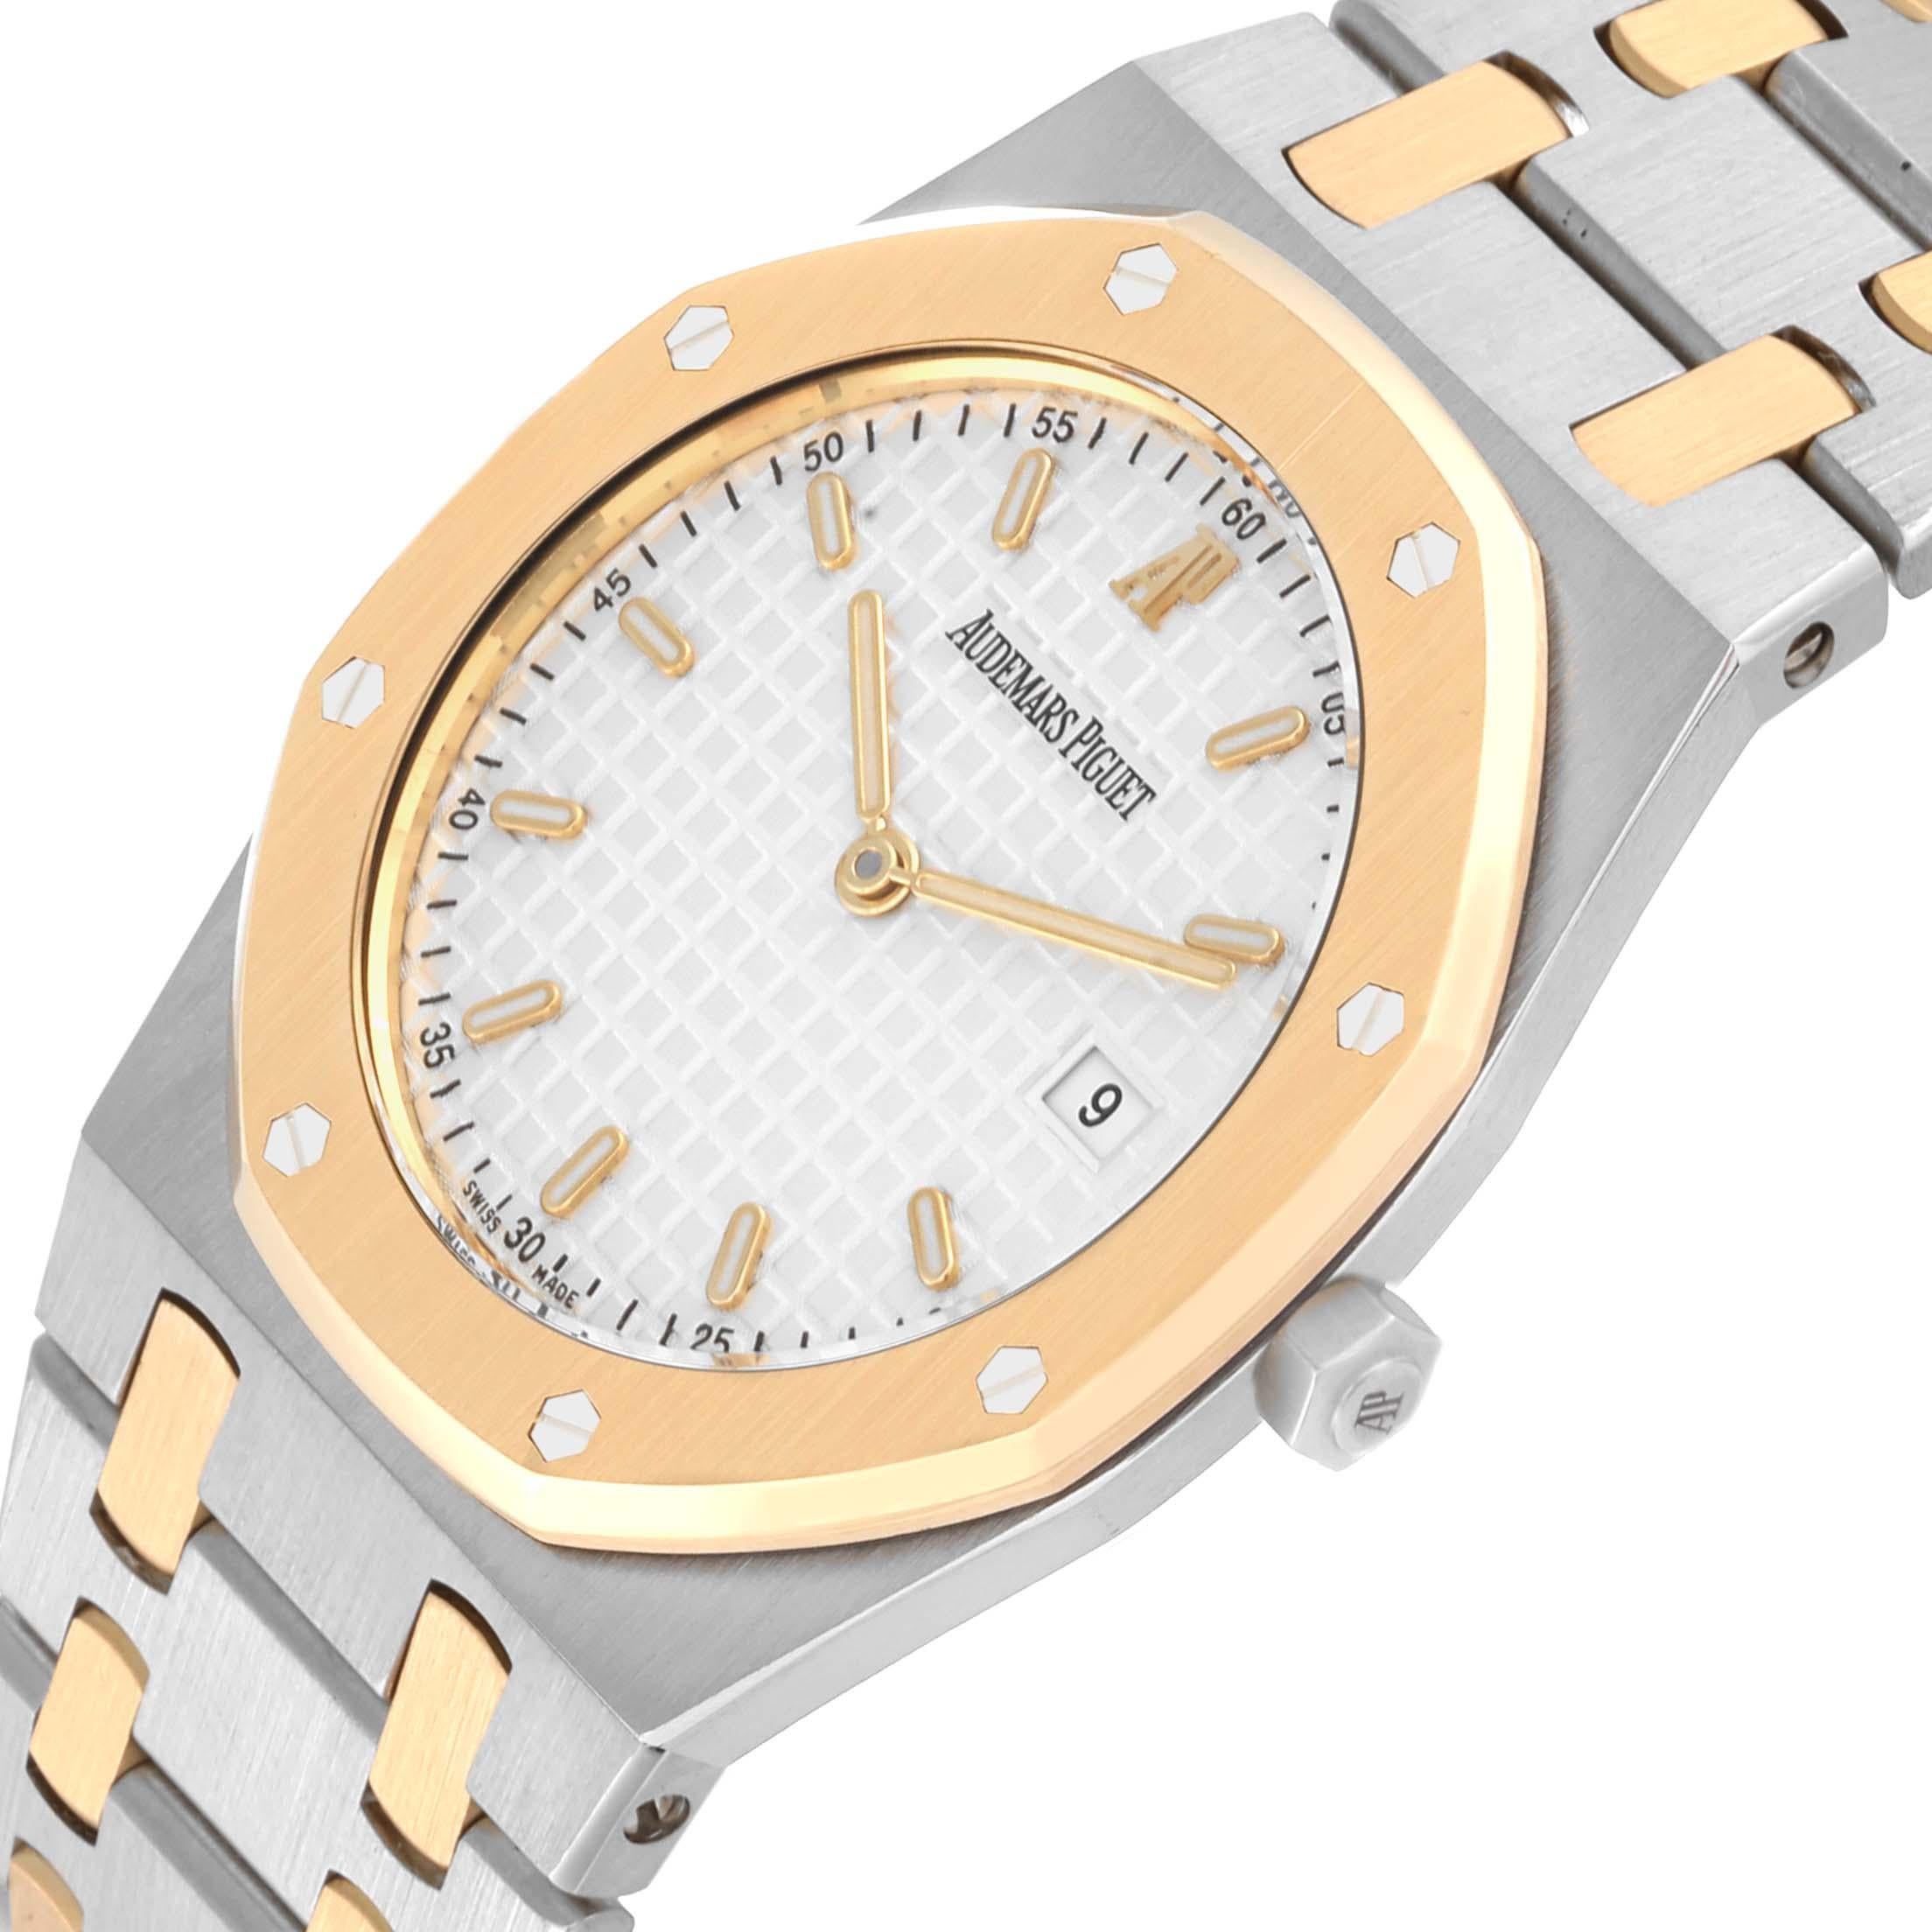 Audemars Piguet Royal Oak Steel Yellow Gold Mens Watch 57175SA Papers. Quartz movement. Stainless steel and 18K yellow gold case 33.0 mm in diameter. 18K yellow gold bezel punctuated with 8 signature screws. Scratch resistant sapphire crystal. White